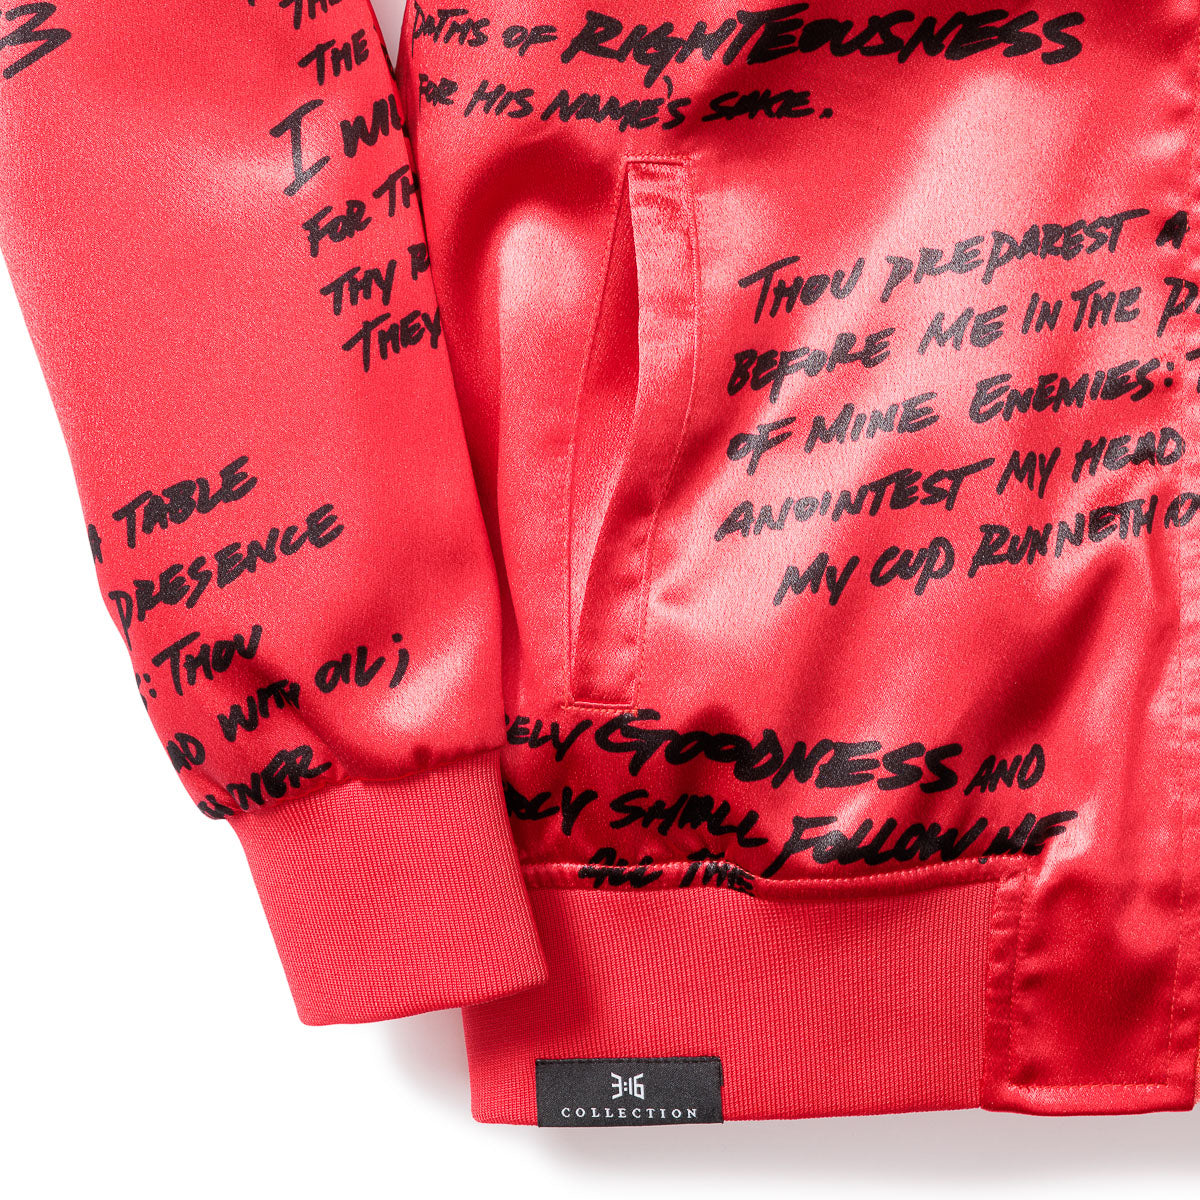 Psalm 23 Bomber Jacket - Satin Red - Limited Edition